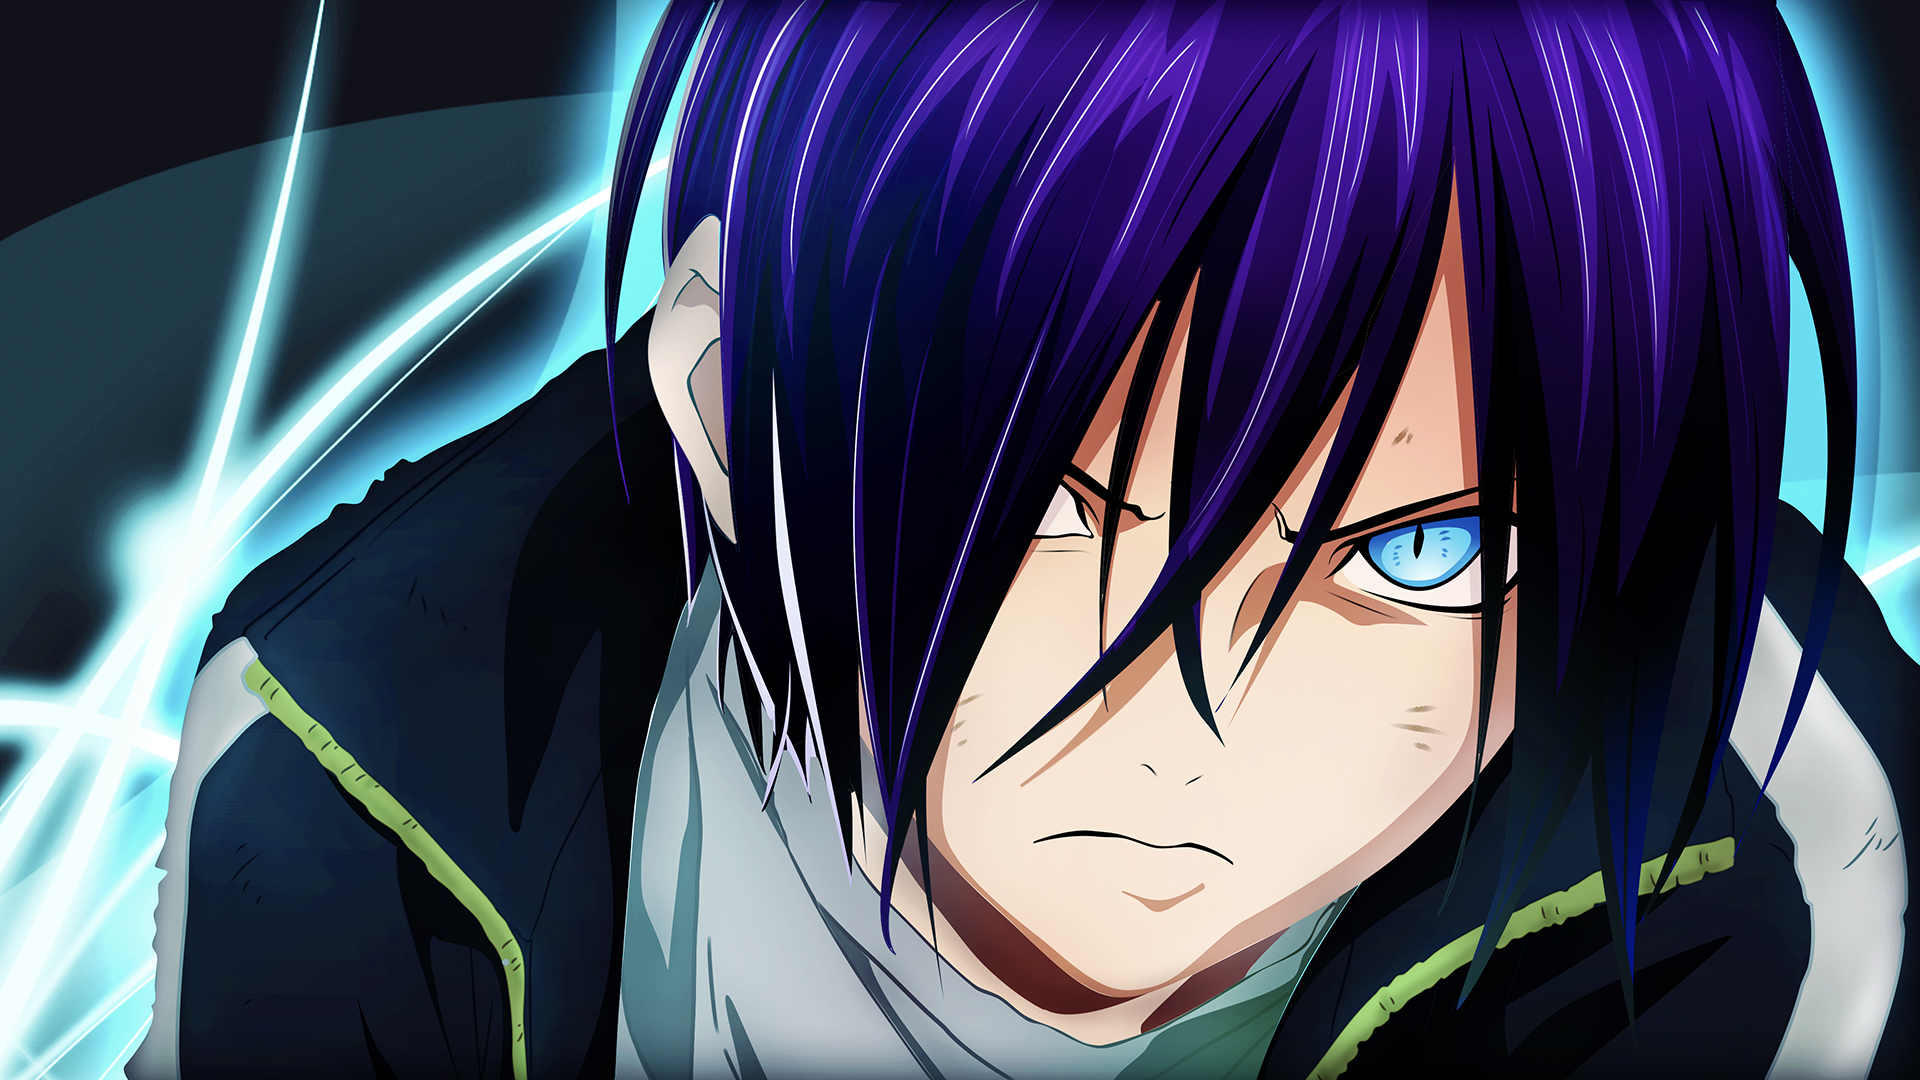 7. Yato from Noragami - wide 4